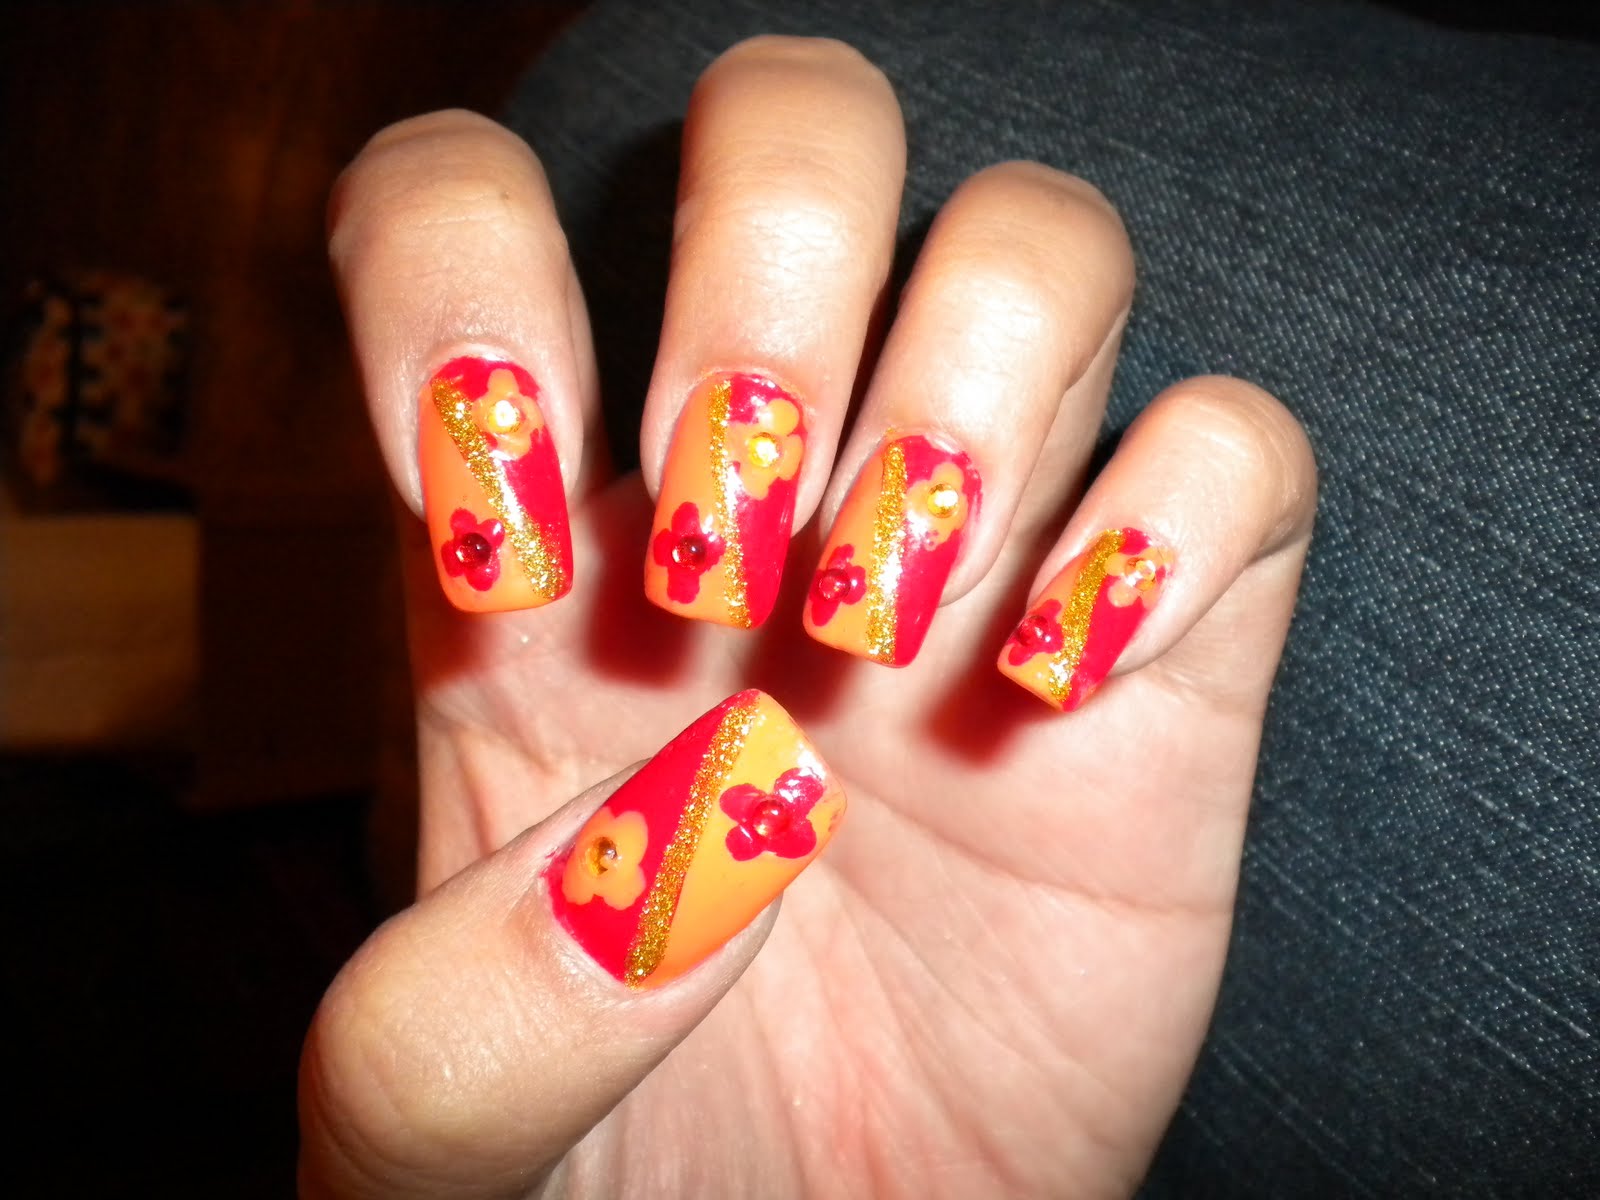 2. Festive Thanksgiving Nails - wide 8